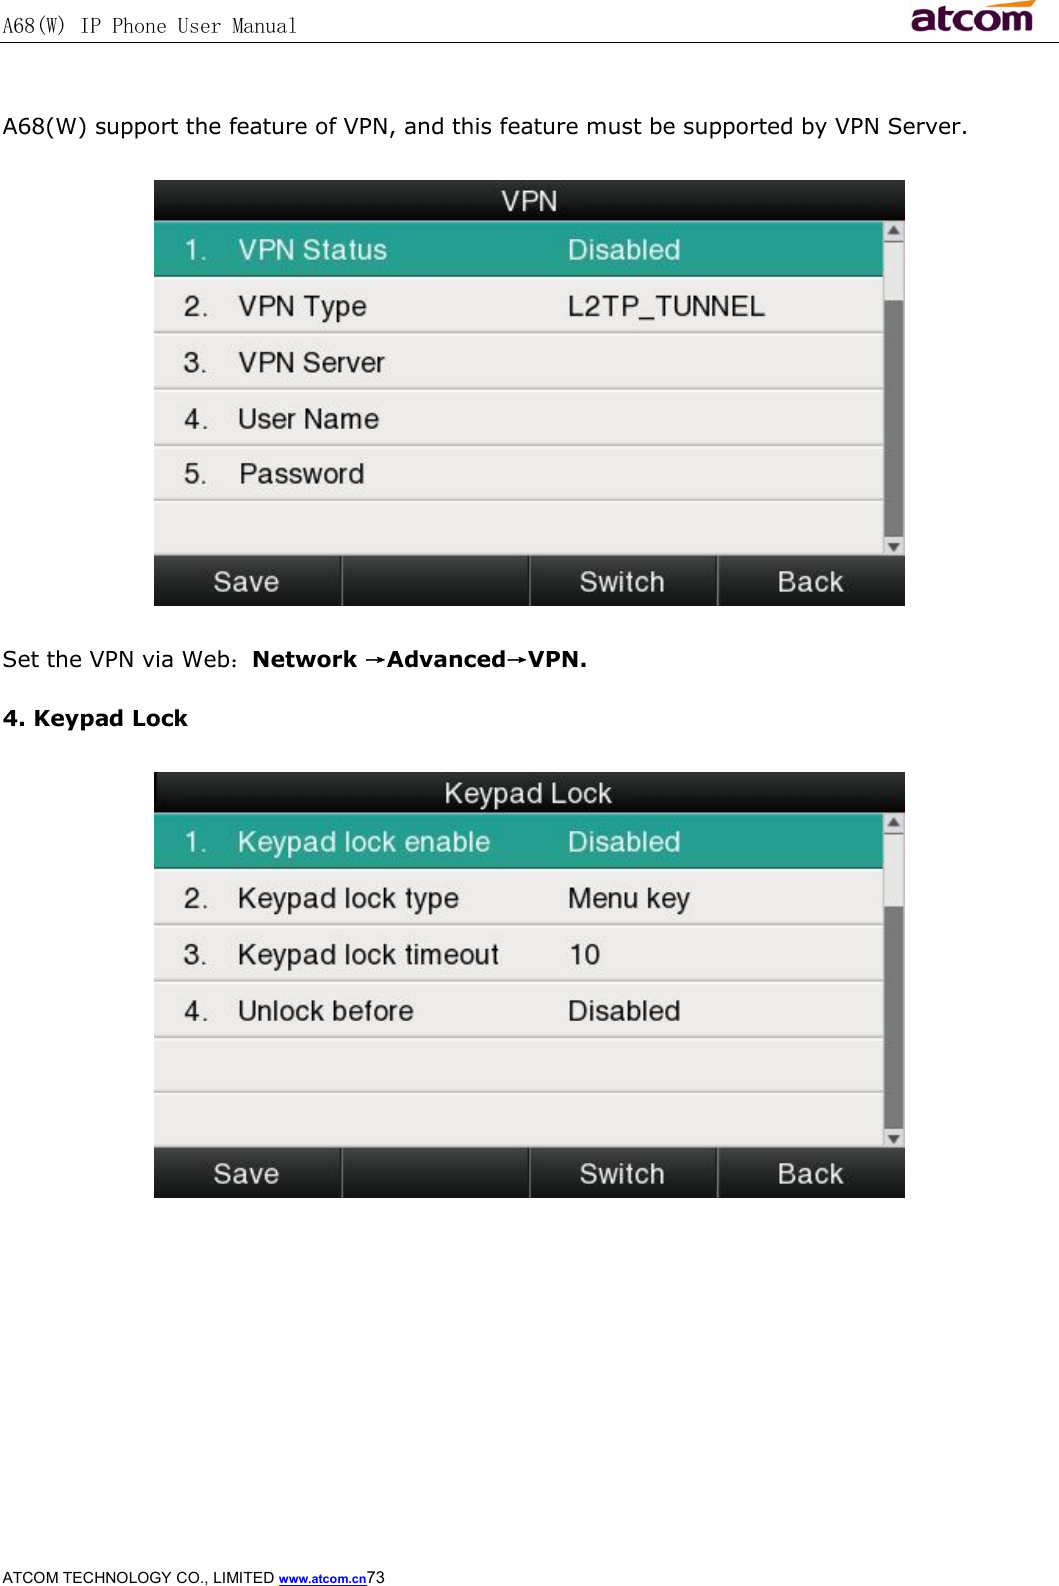 A68(W) IP Phone User Manual                                                           ATCOM TECHNOLOGY CO., LIMITED www.atcom.cn73   A68(W) support the feature of VPN, and this feature must be supported by VPN Server.  Set the VPN via Web：Network →Advanced→VPN. 4. Keypad Lock       